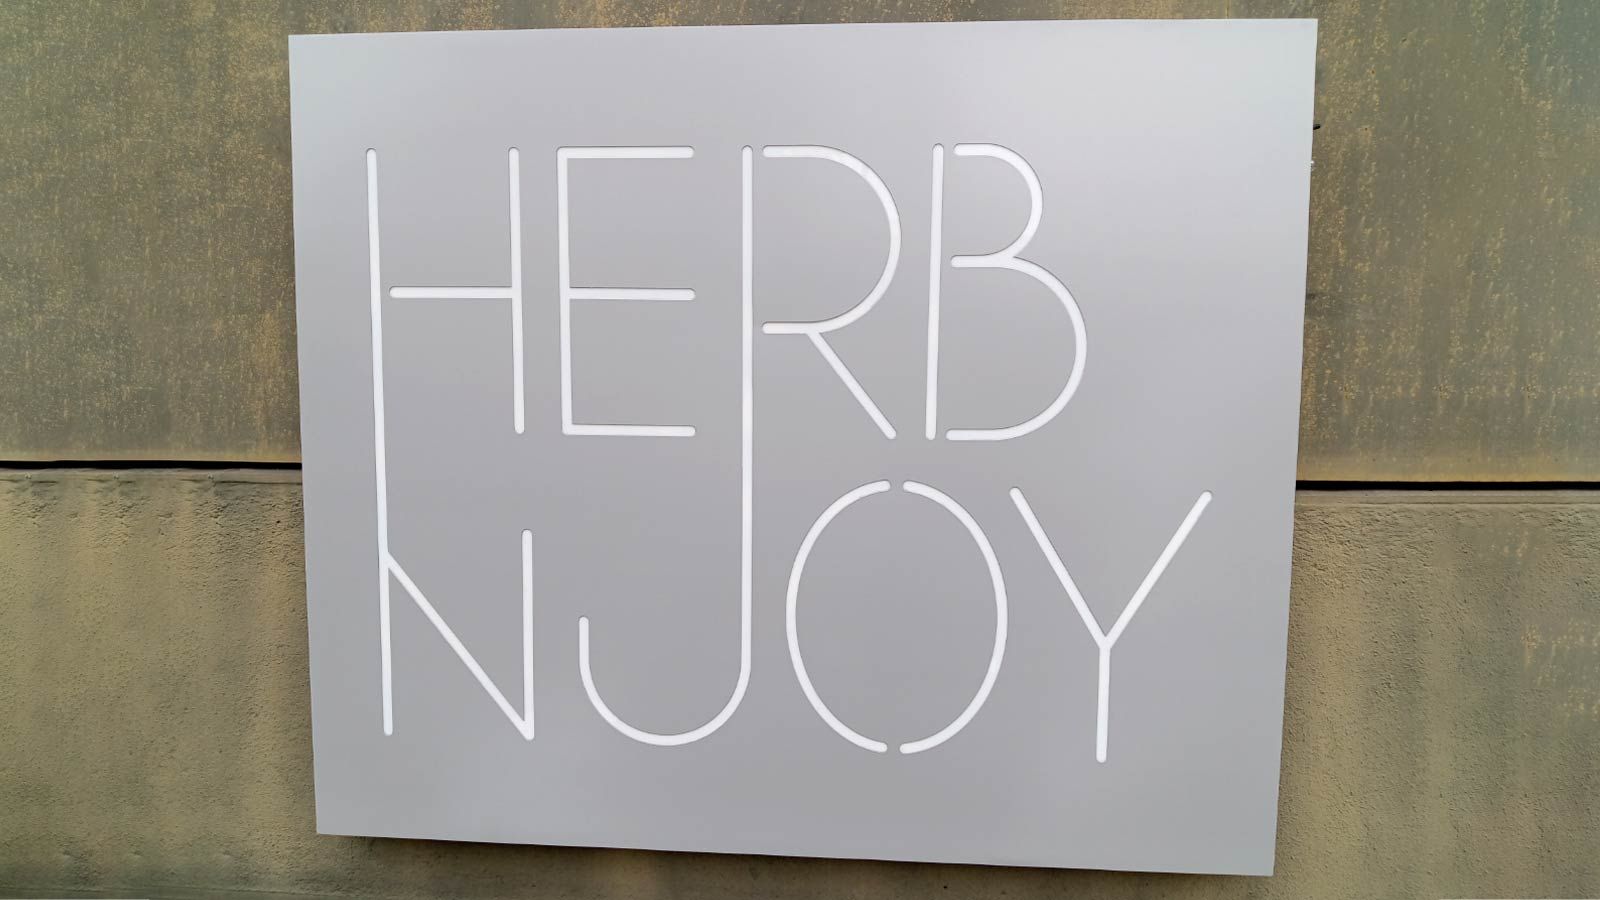 HerbNJoy light up signage mounted to the exterior wall